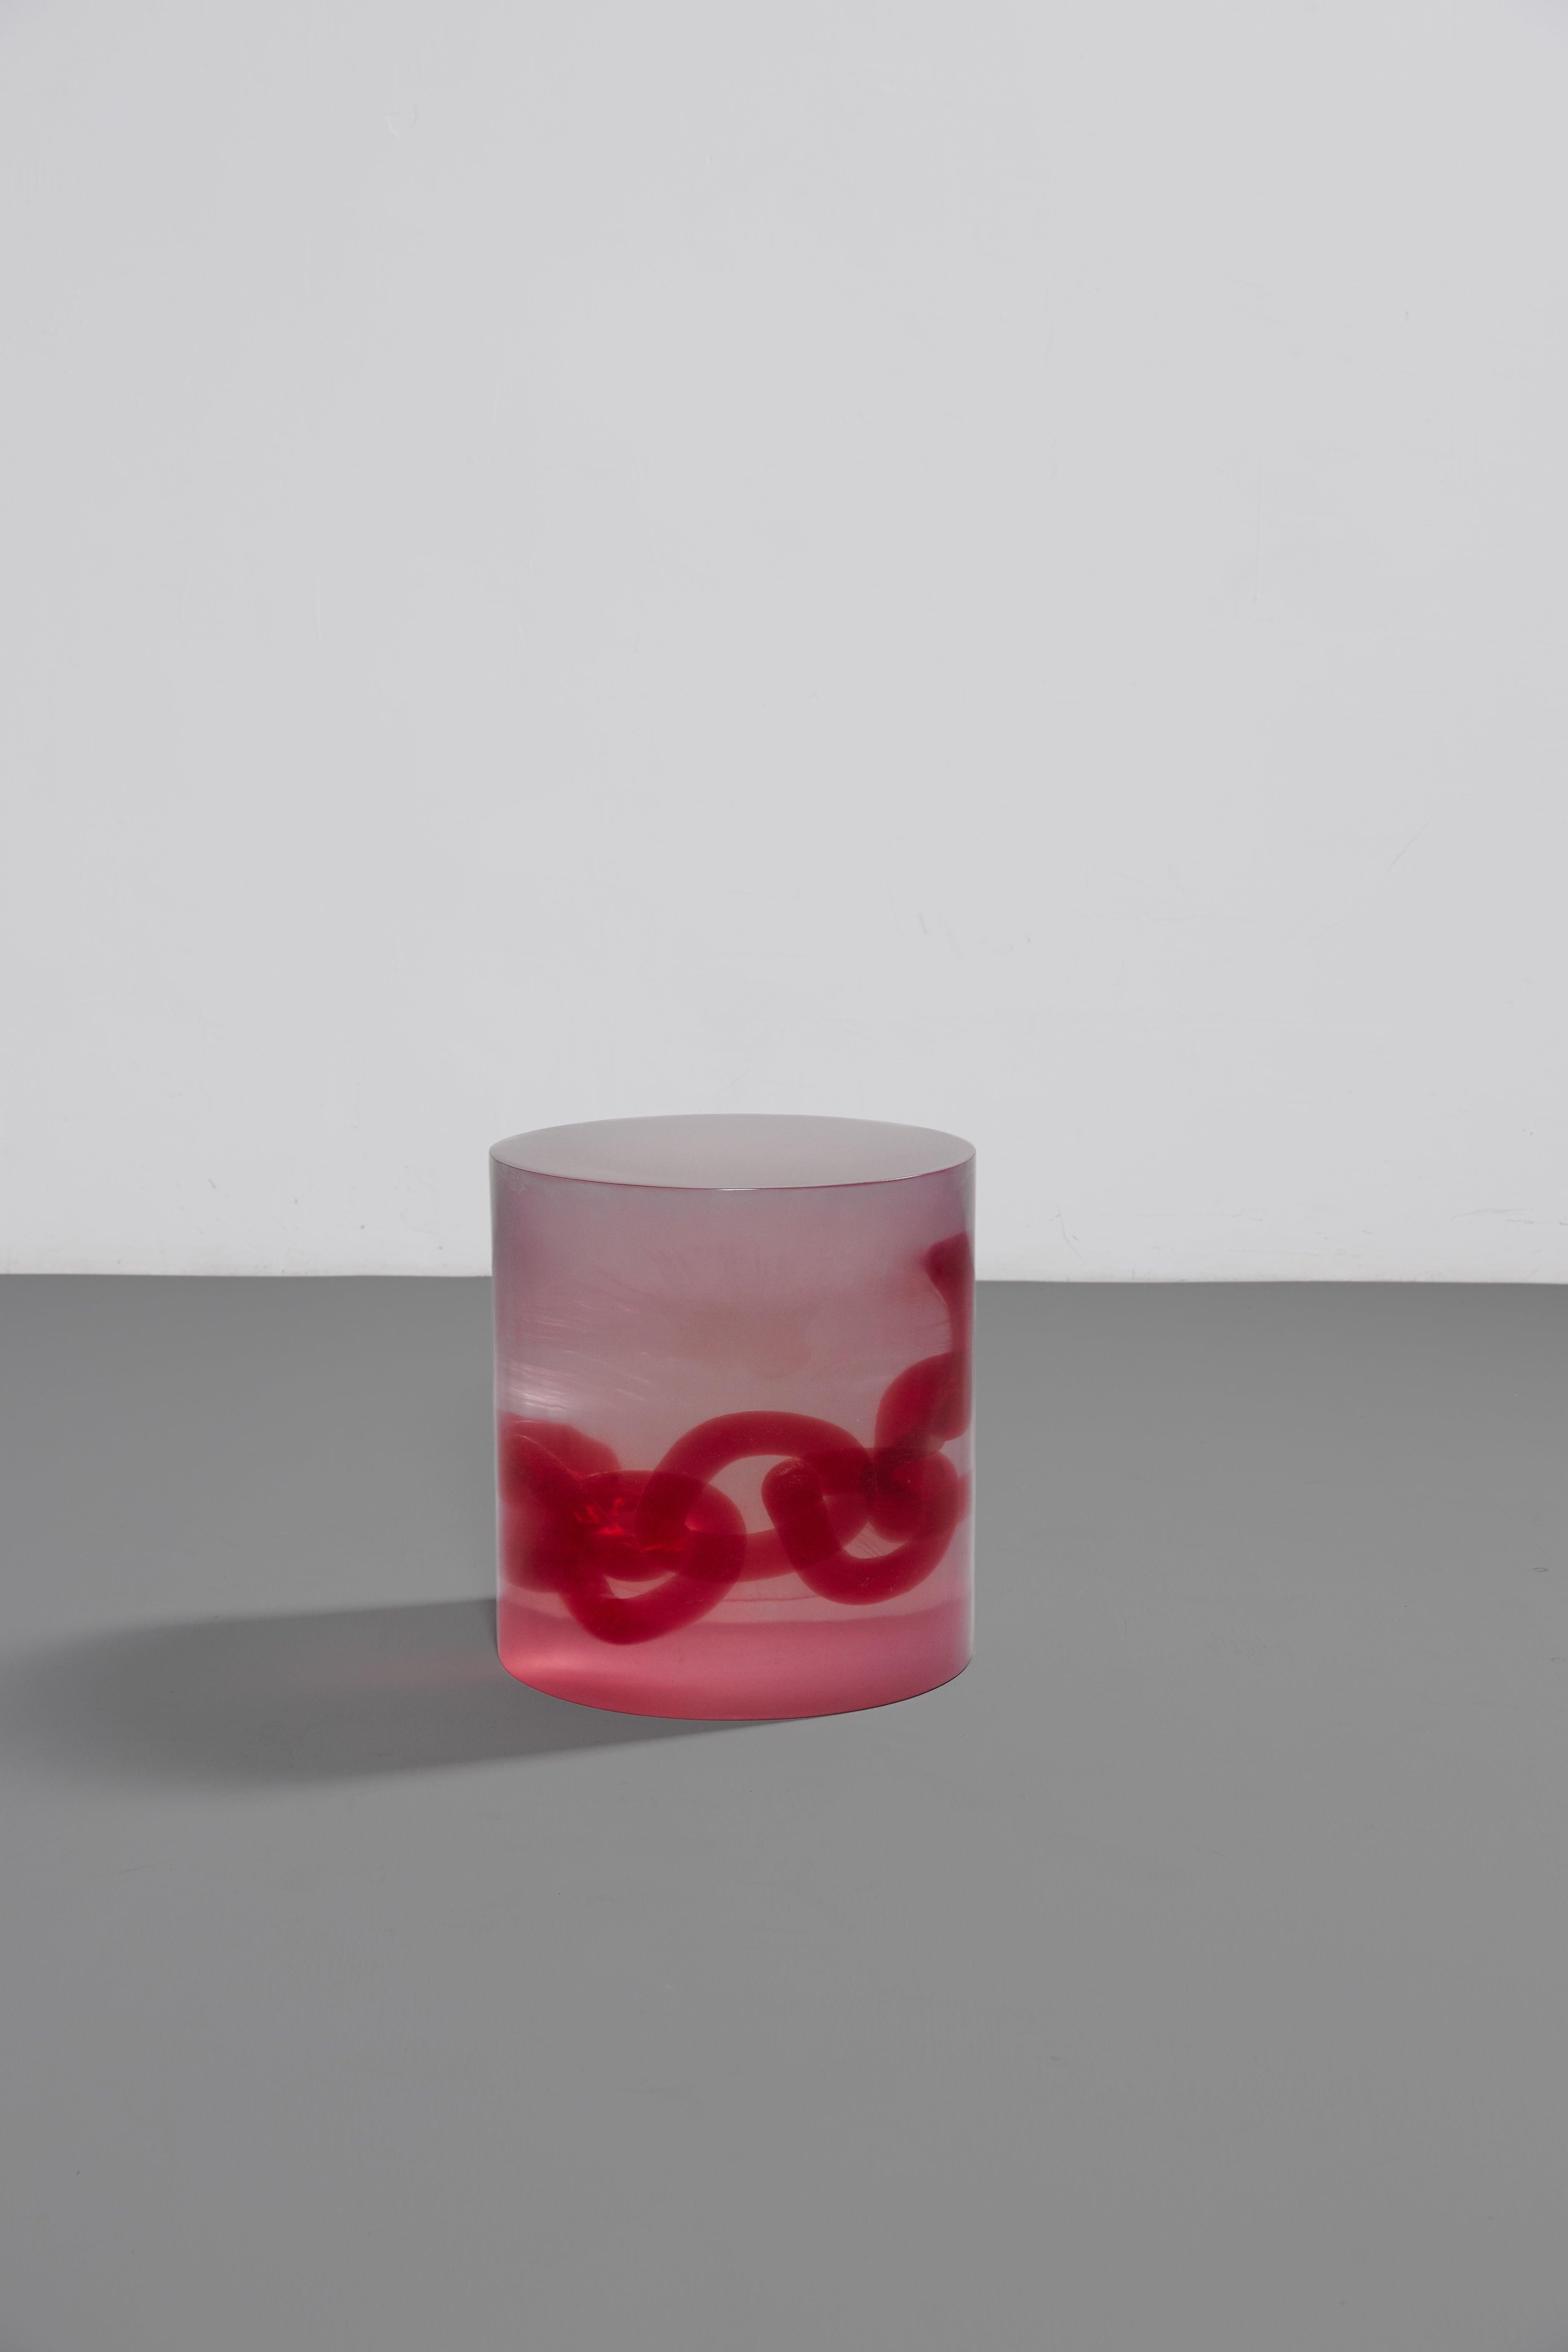 Cast Seeing Through Your Illusions Chain, Pink Translucent Resin Stool by Hua Wang For Sale